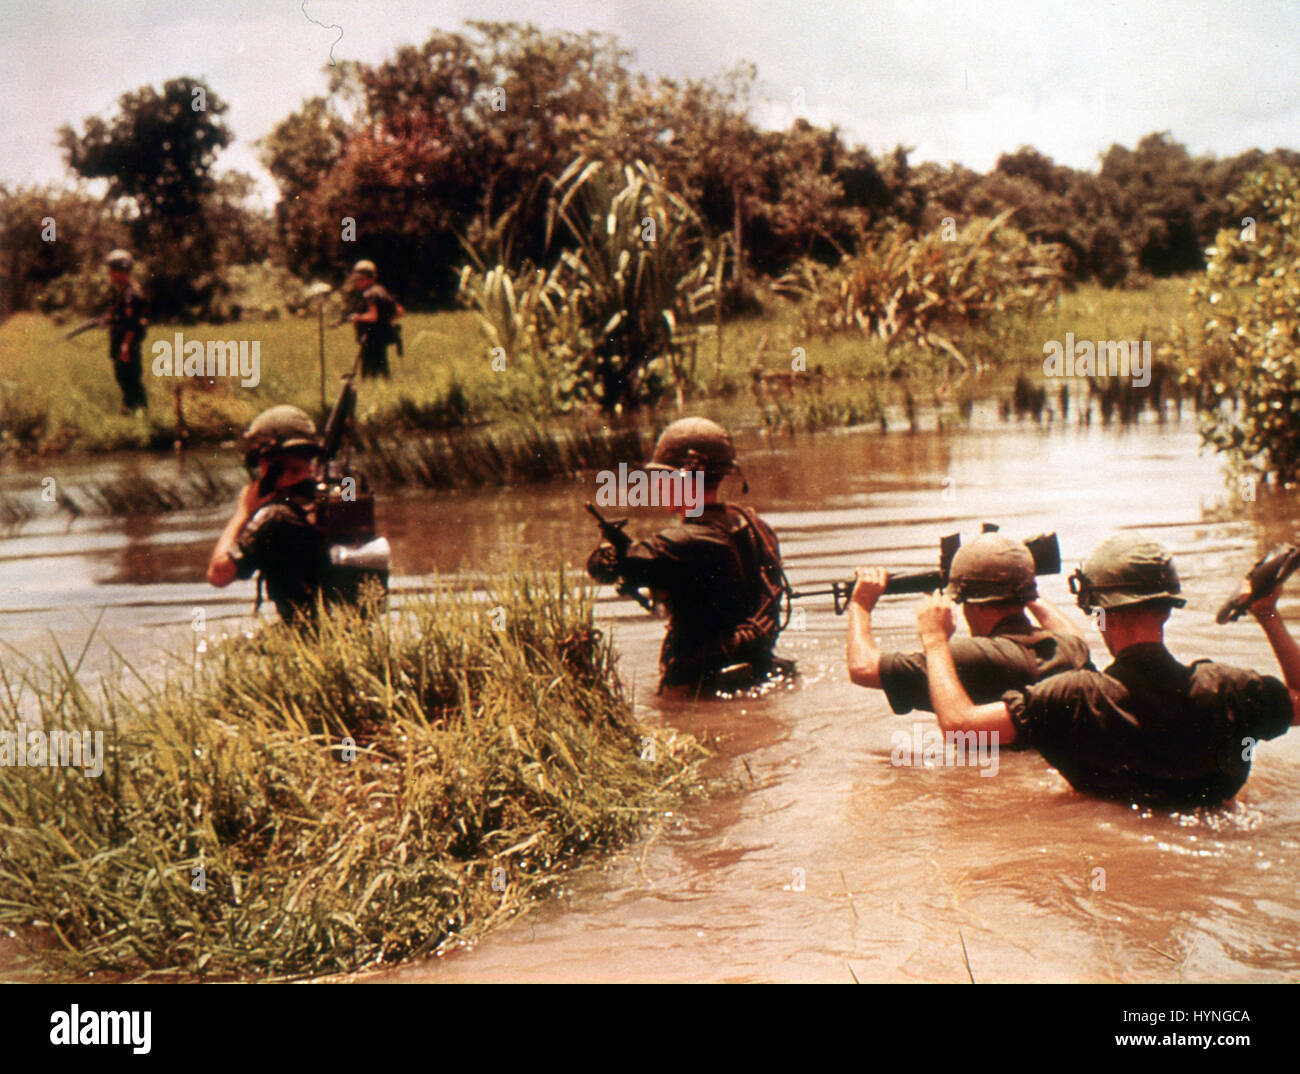 16th Armored Division members cross a jungle river in previous Viet Cong territory. Vietnam, 9/65. Stock Photo